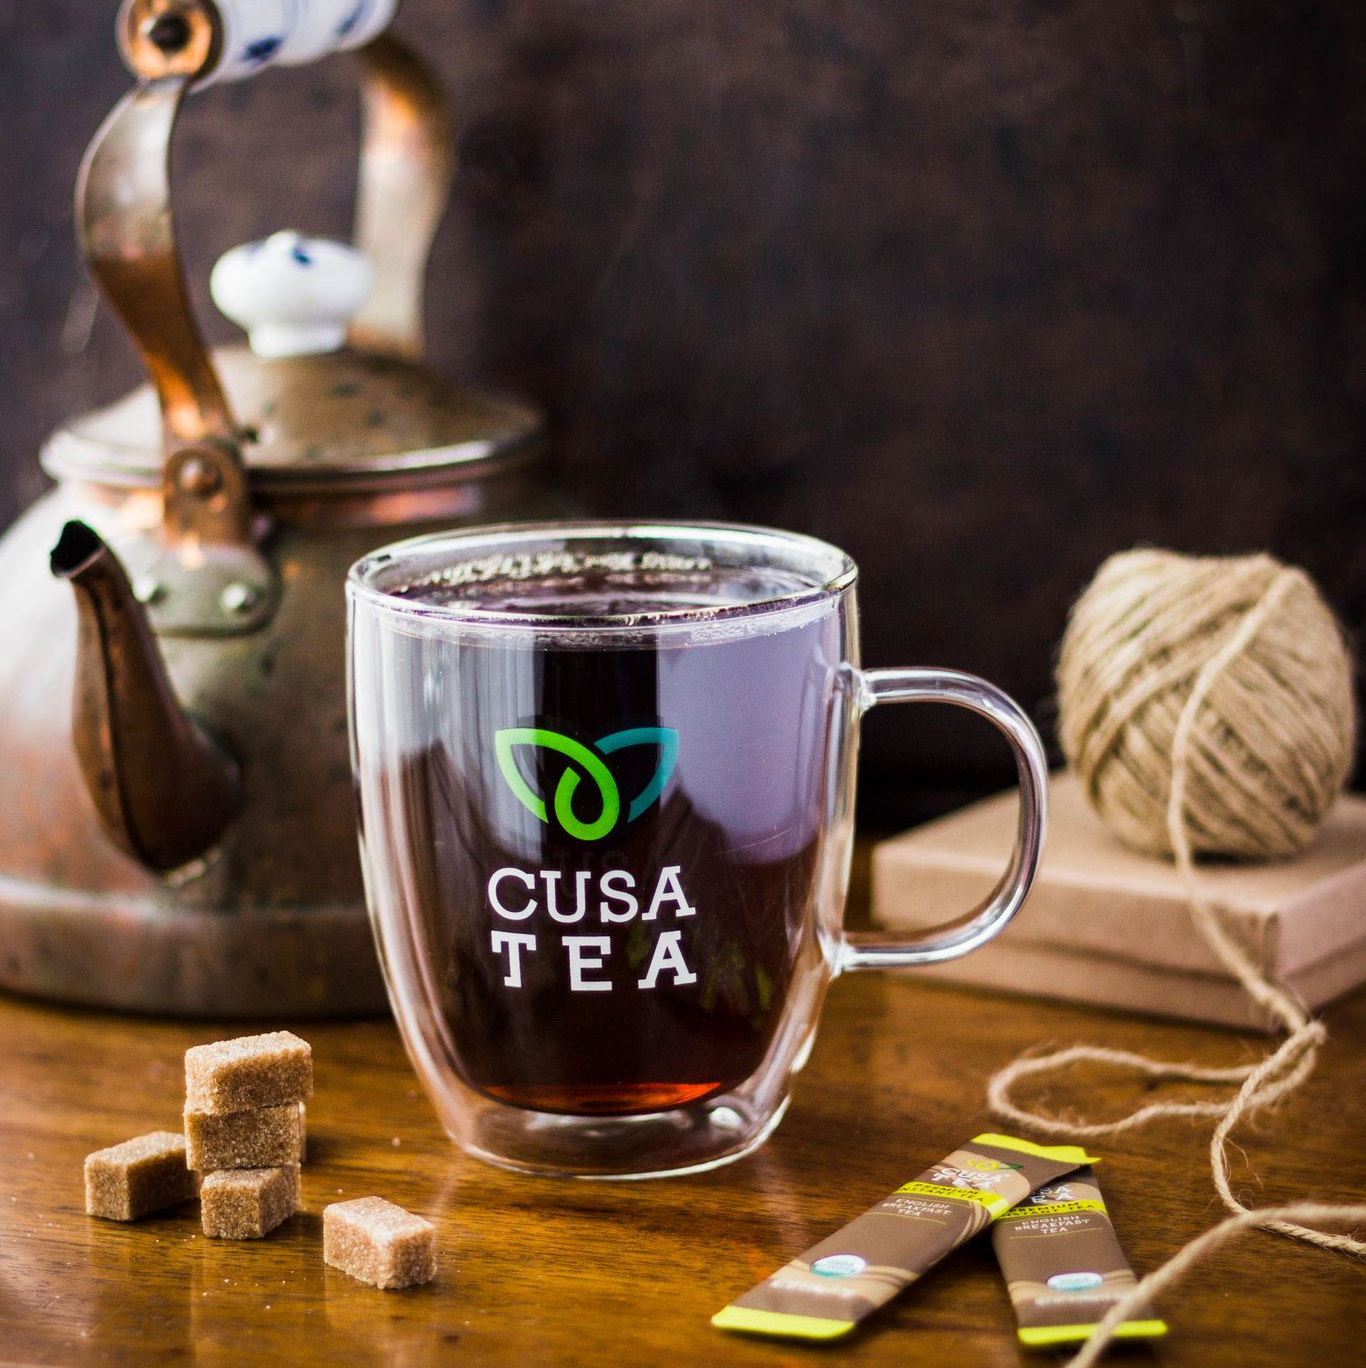 Cusa Tea & Coffee | Premium Instant Peach Black Tea with Real Fruit & Spices | Organic Leaves Drink Mix Packets | Hot or Iced Tea (30 Single Servings)